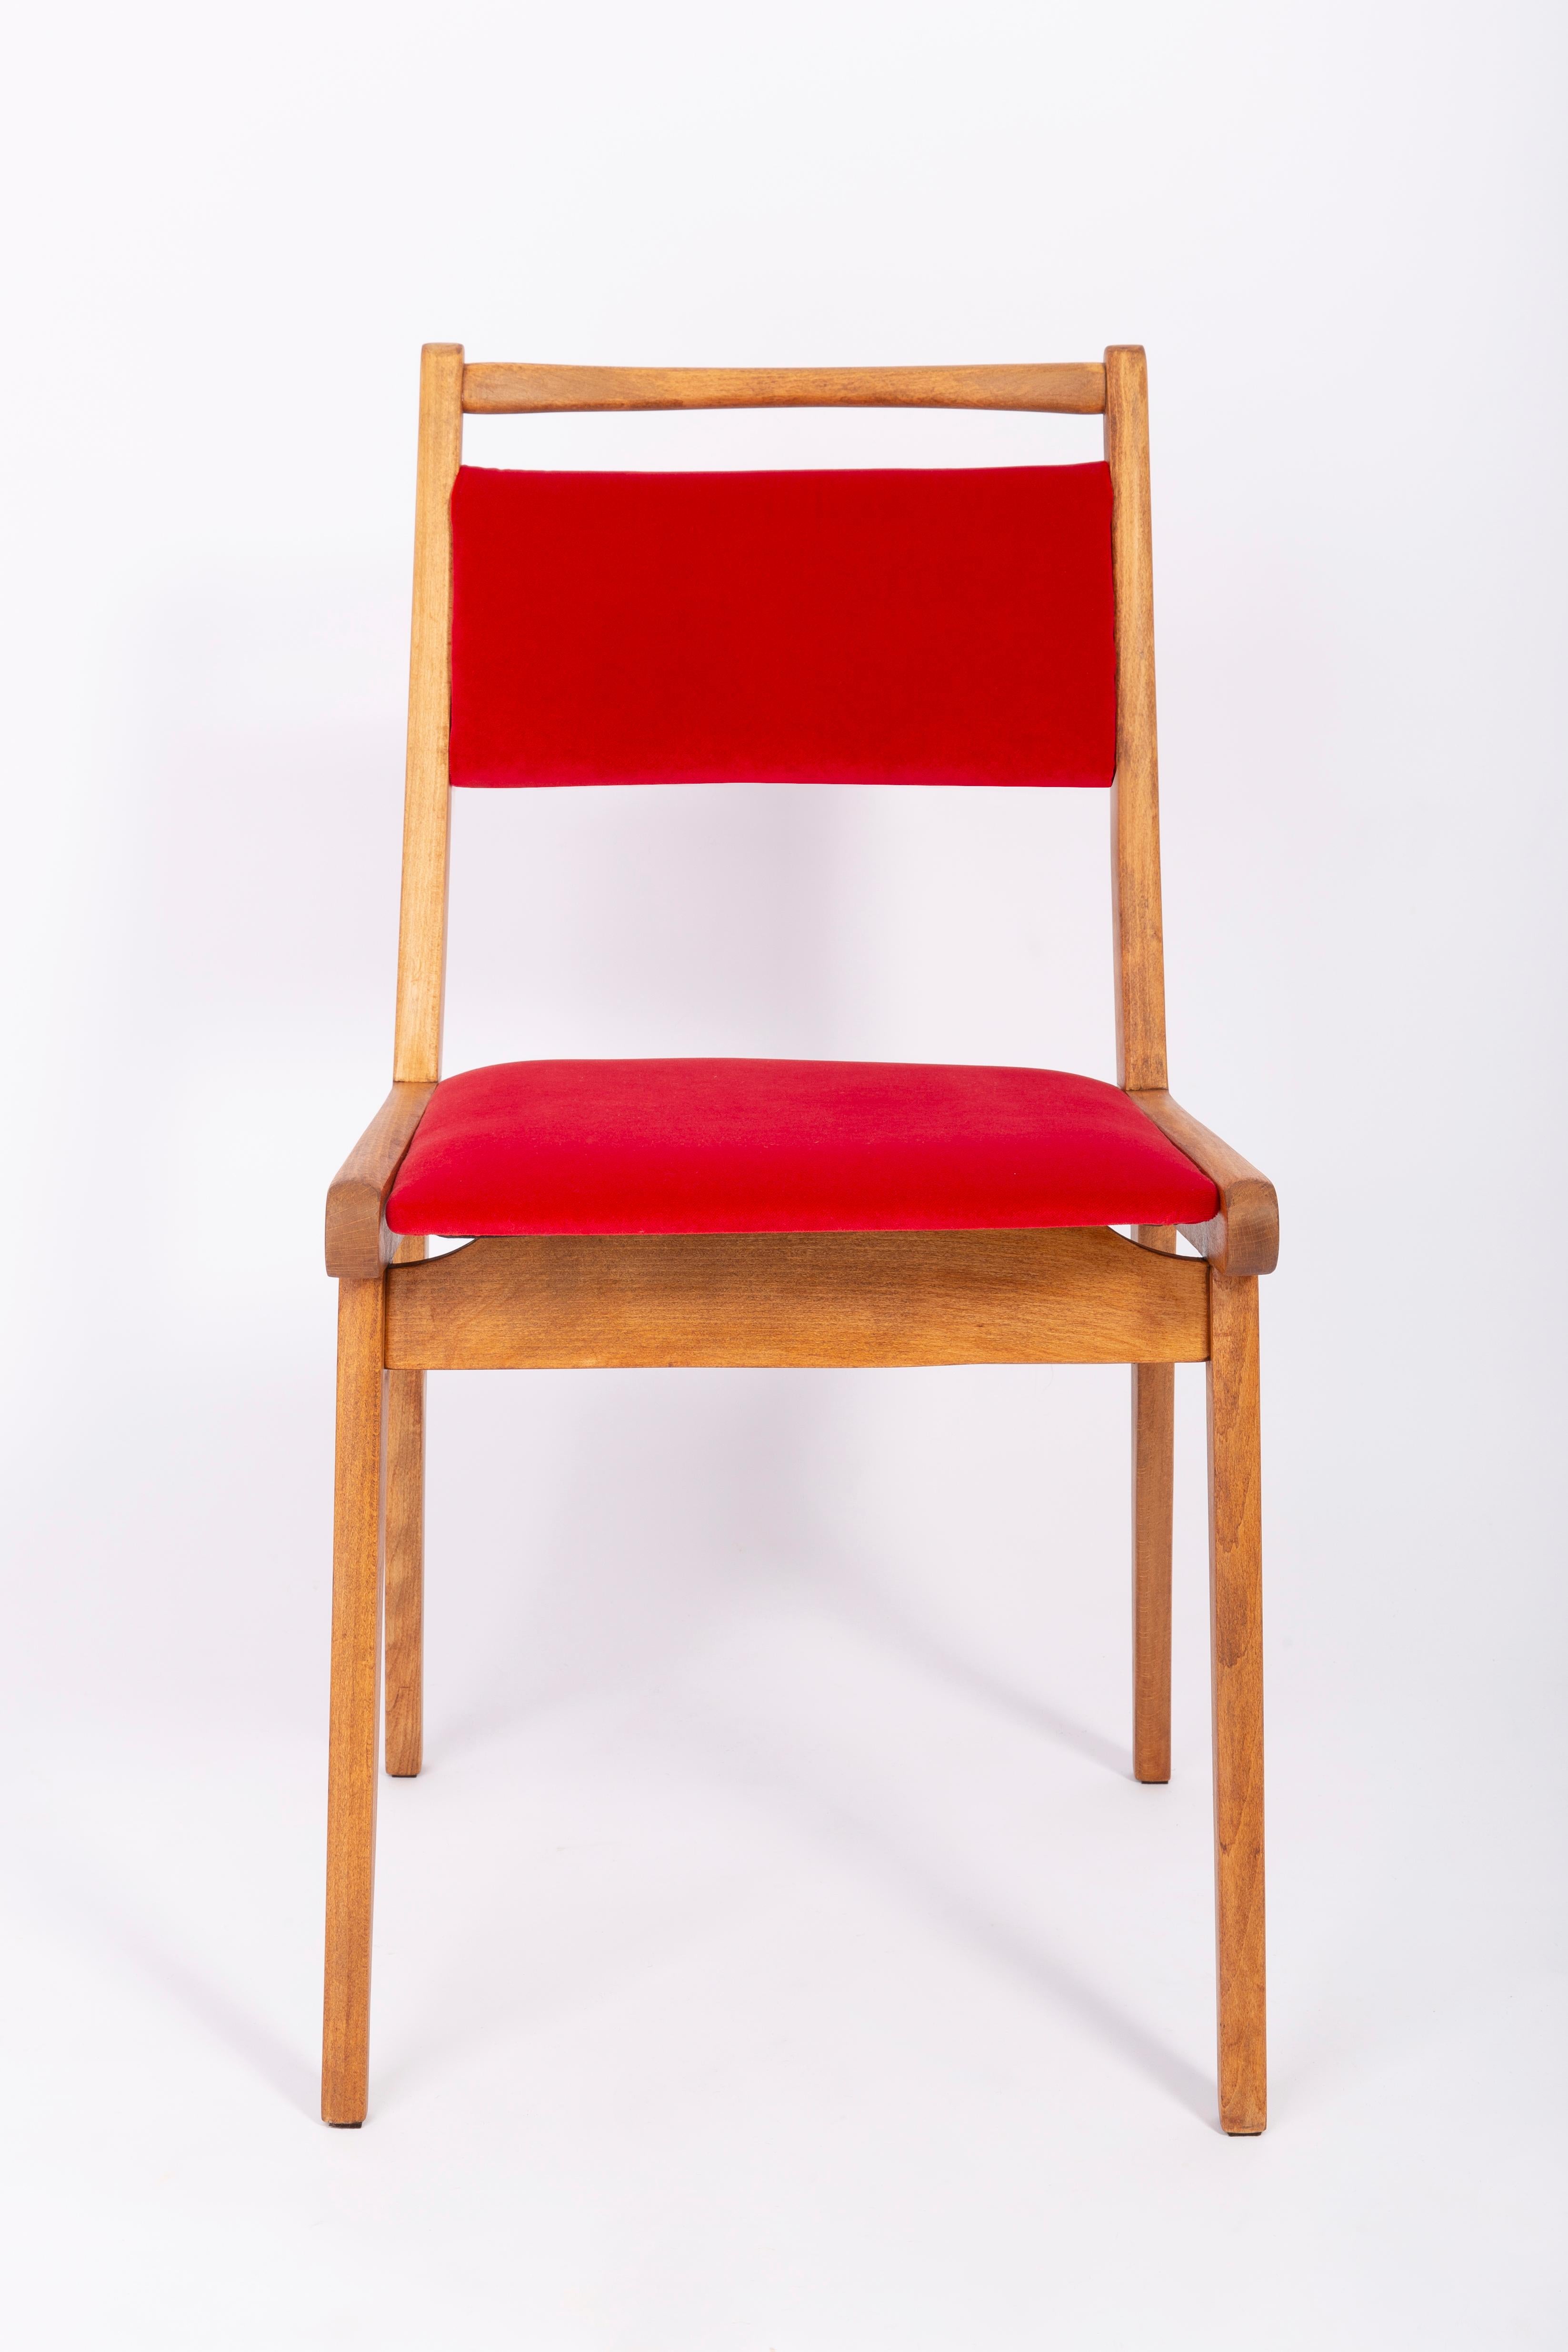 Set of Two 20th Century White and Red Velvet Chairs, Poland, 1960s For Sale 9